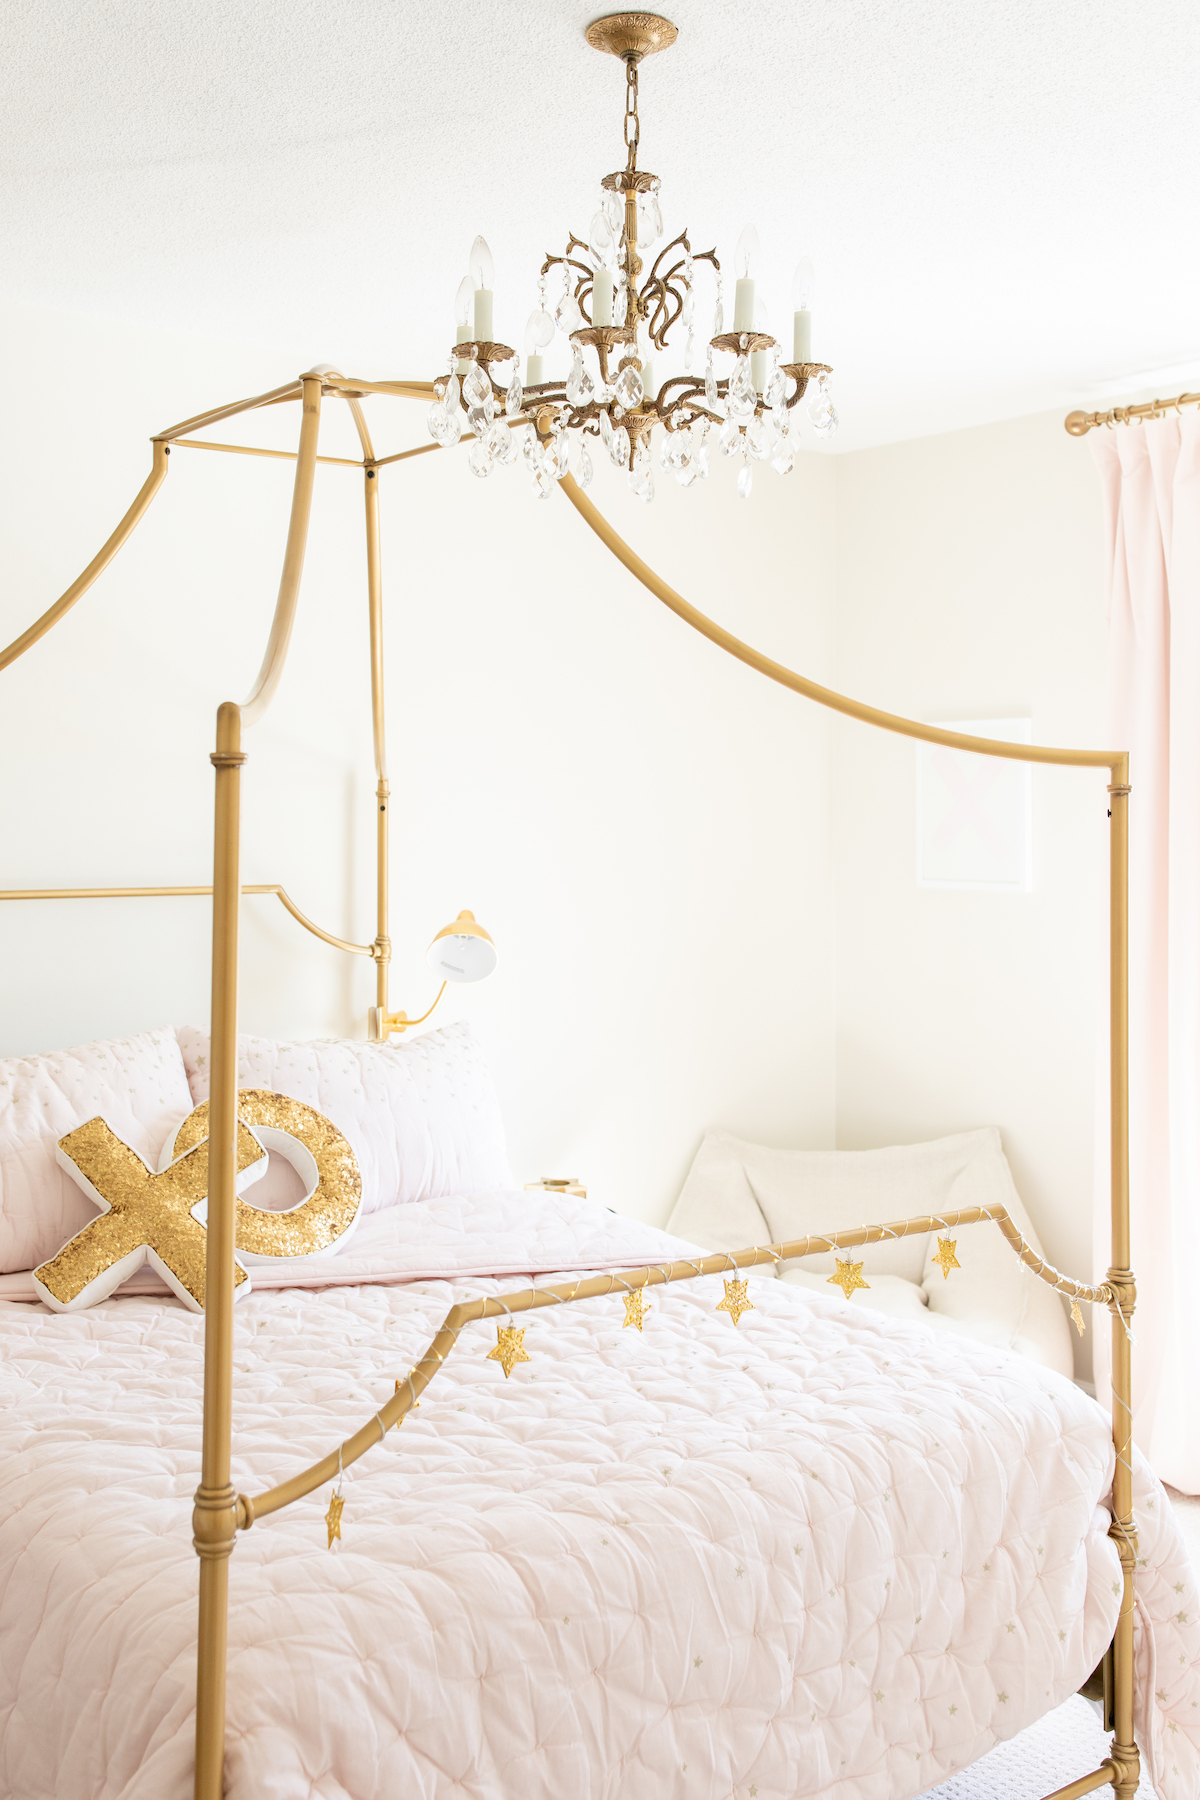 A cream, pink and gold tween bedroom with a gold canopy bed.